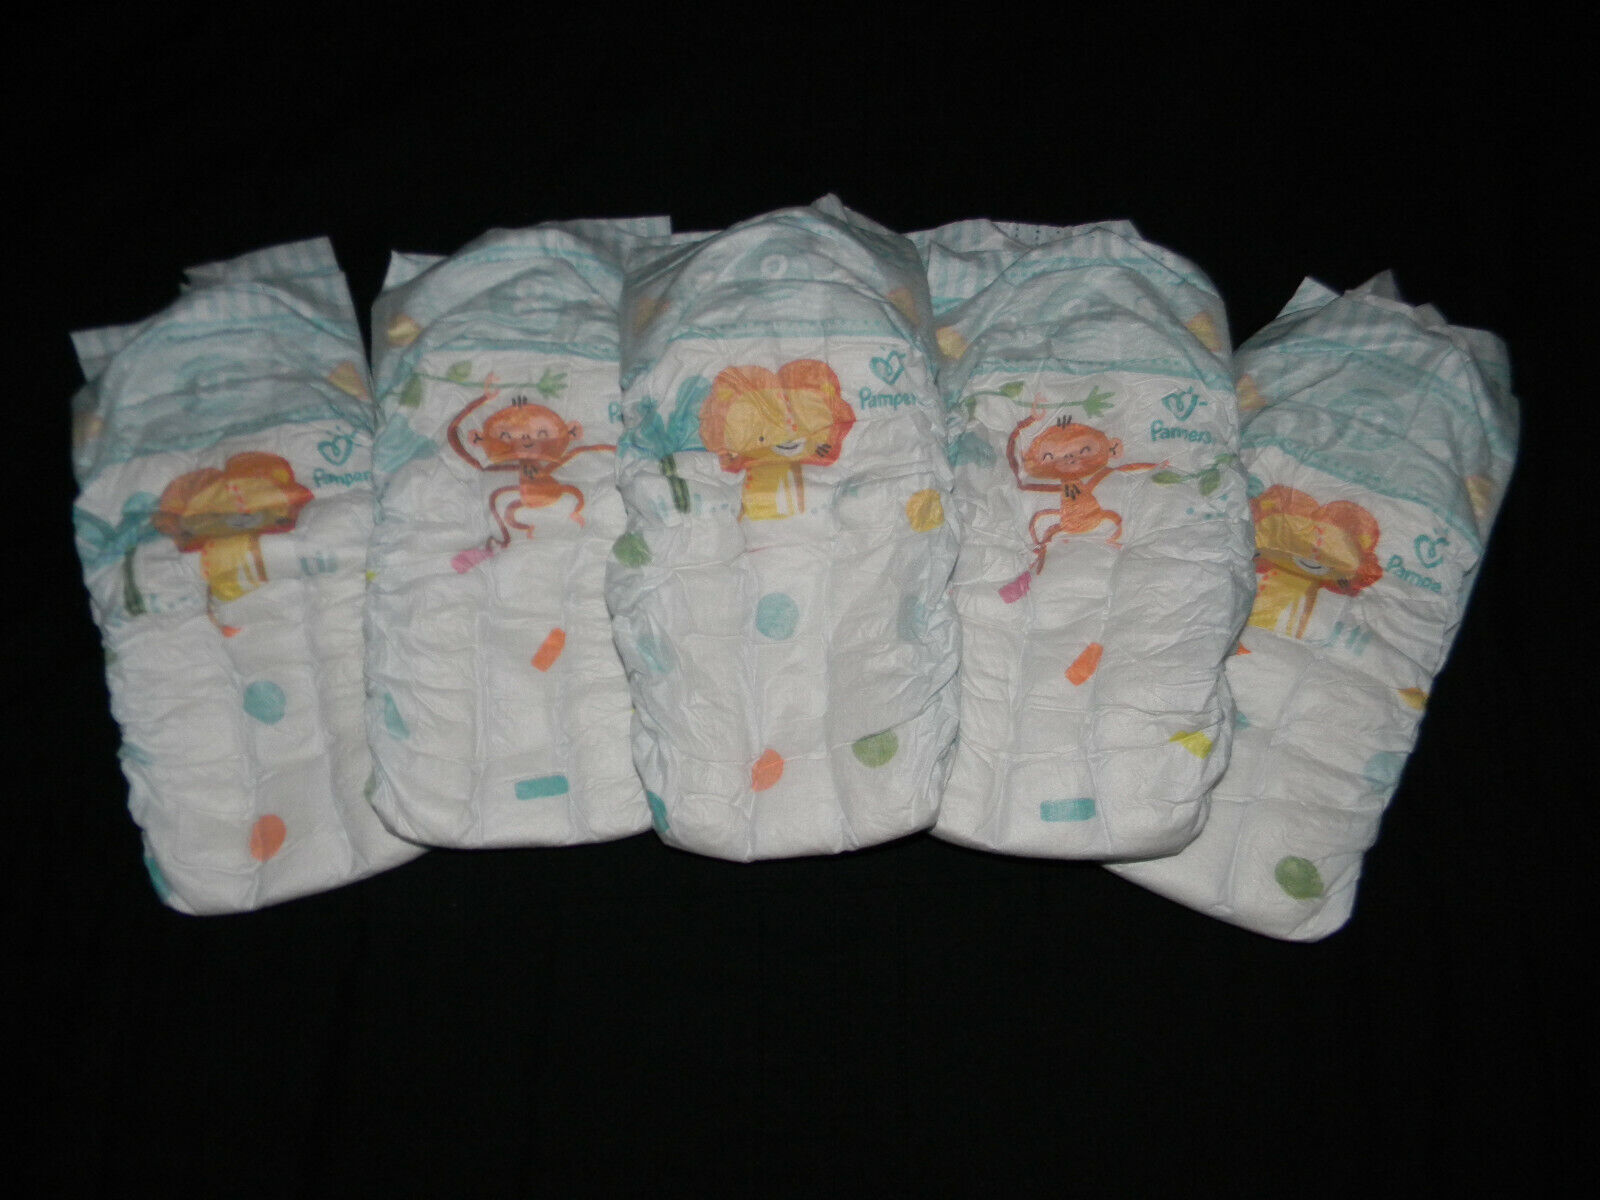 5 Sample Pampers- Baby Nappies Size 8 Over 37+lbs